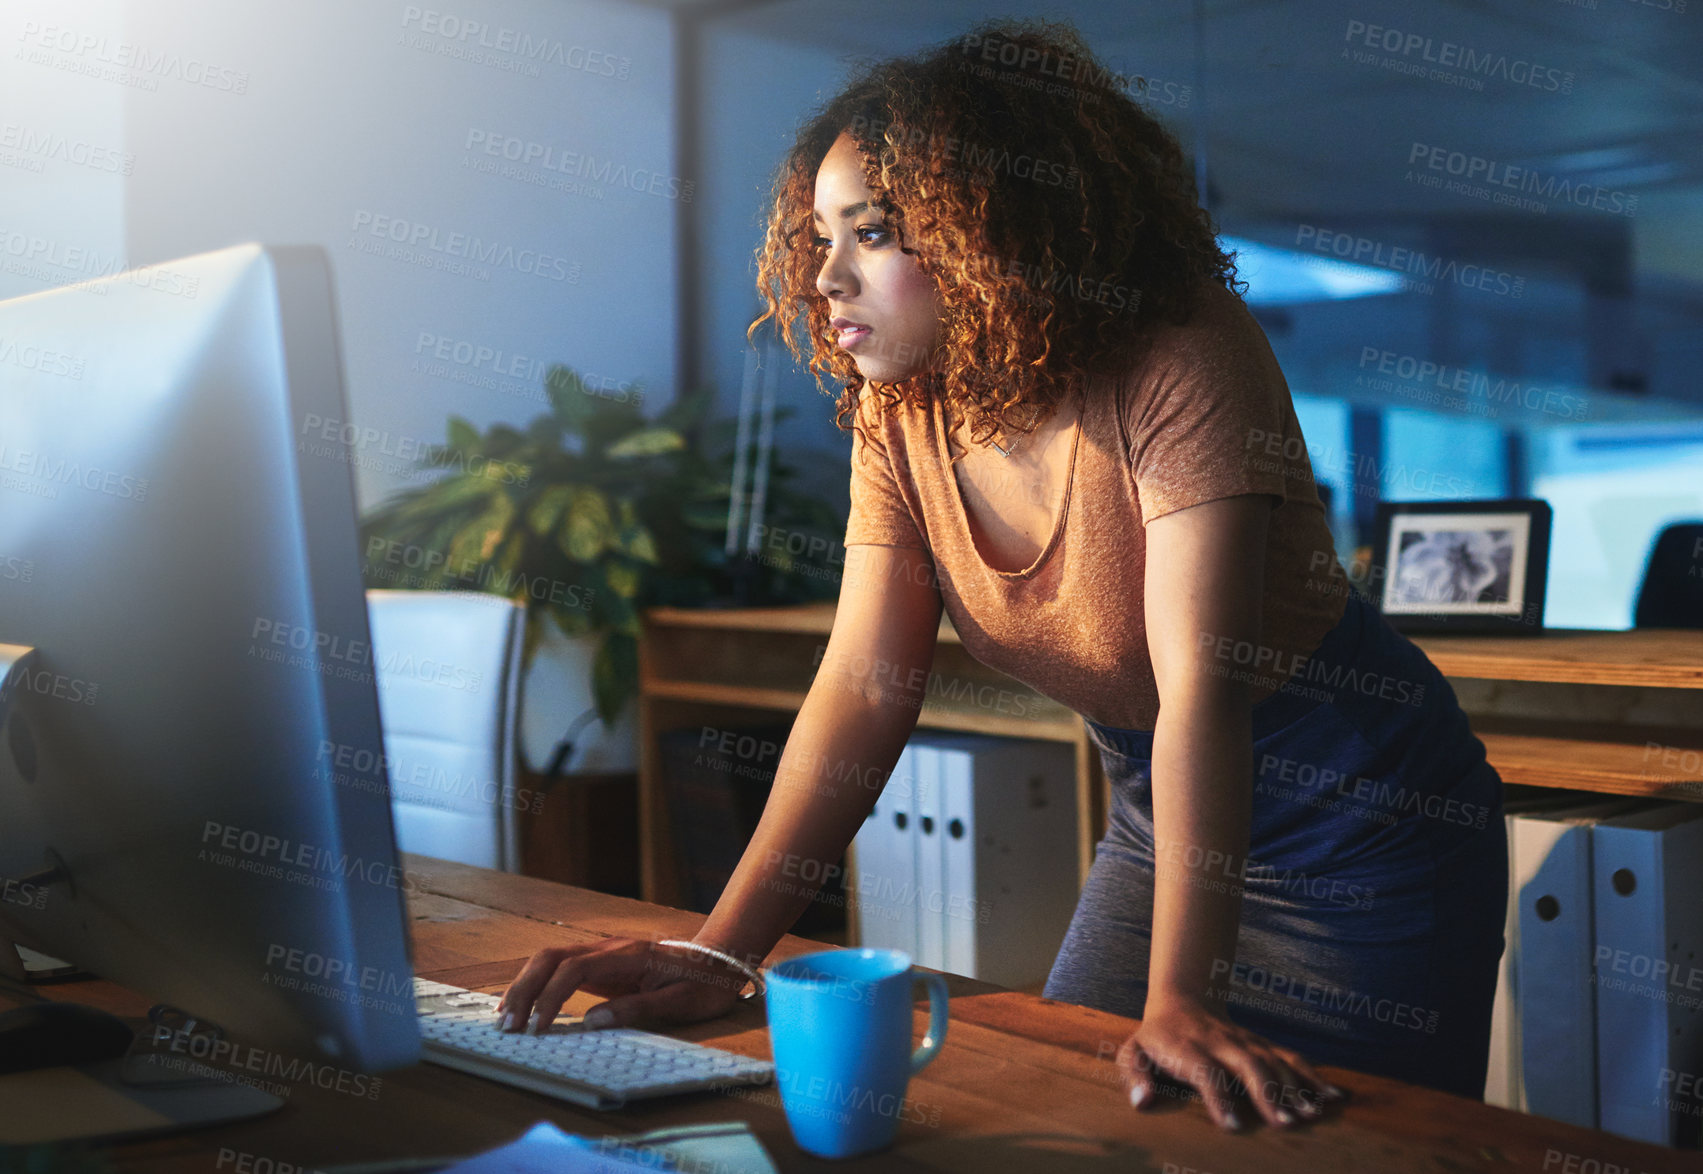 Buy stock photo Shot of a young woman working late in an empty office